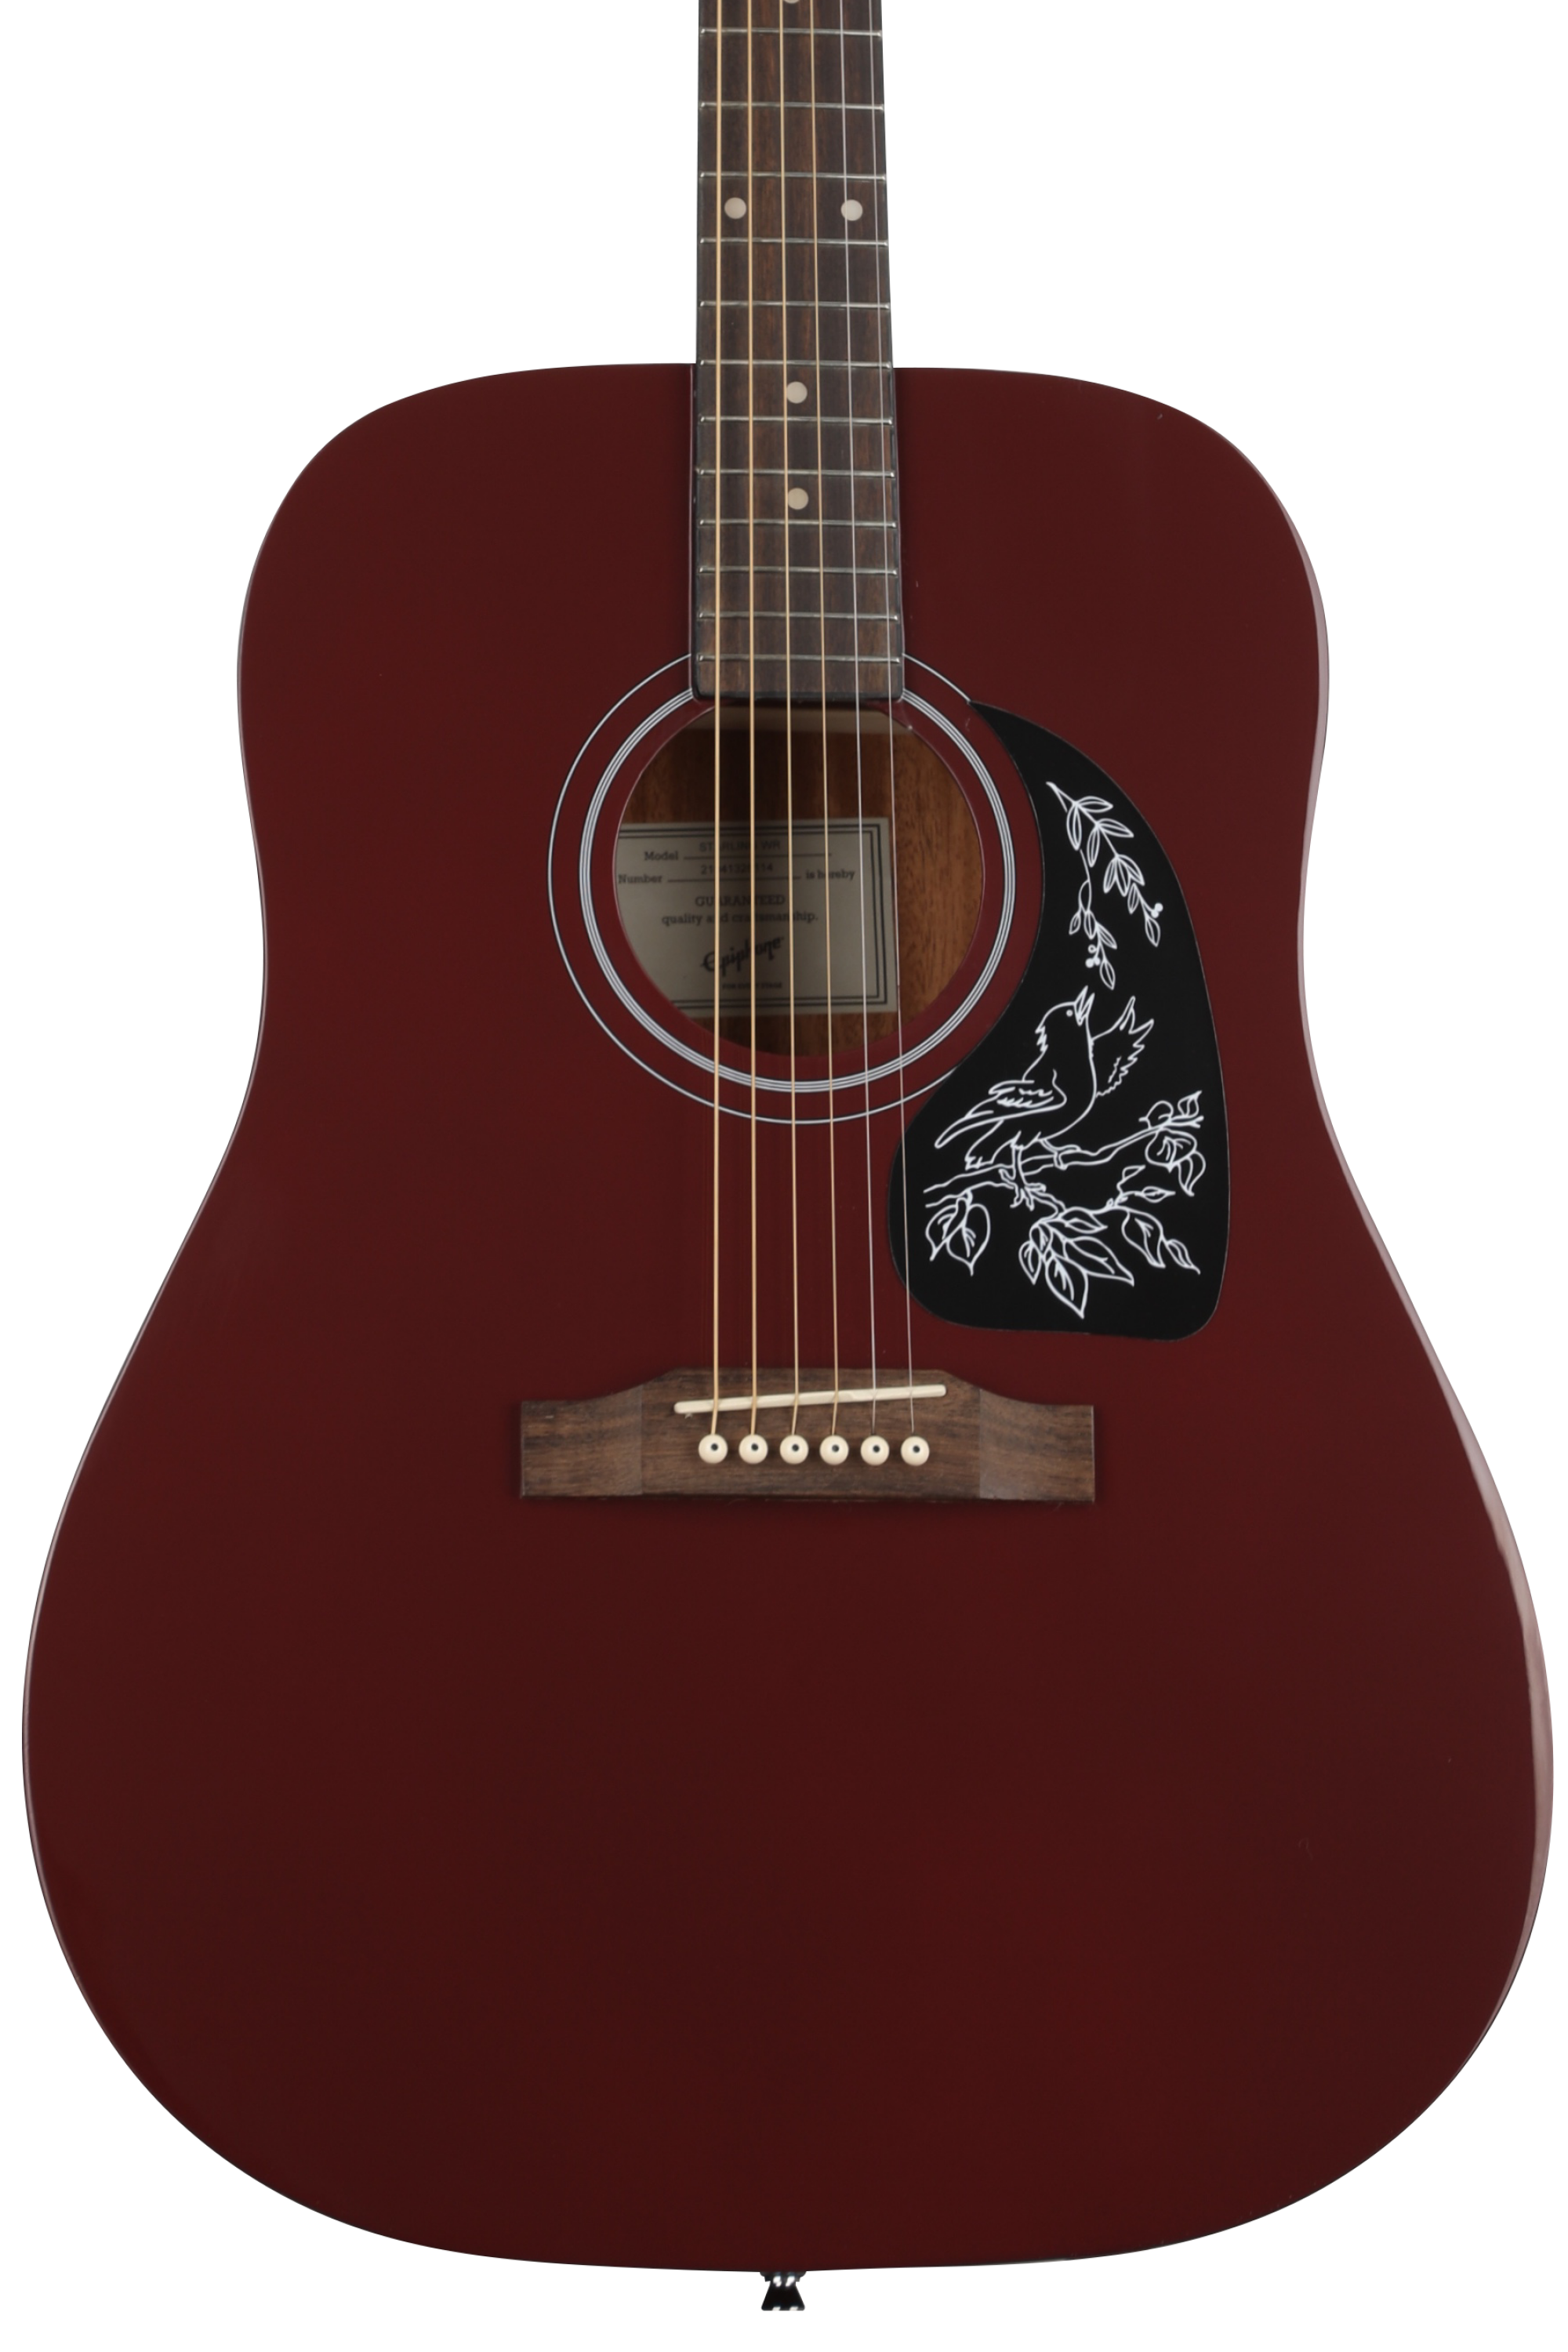 Epiphone Starling Acoustic Guitar - Wine Red